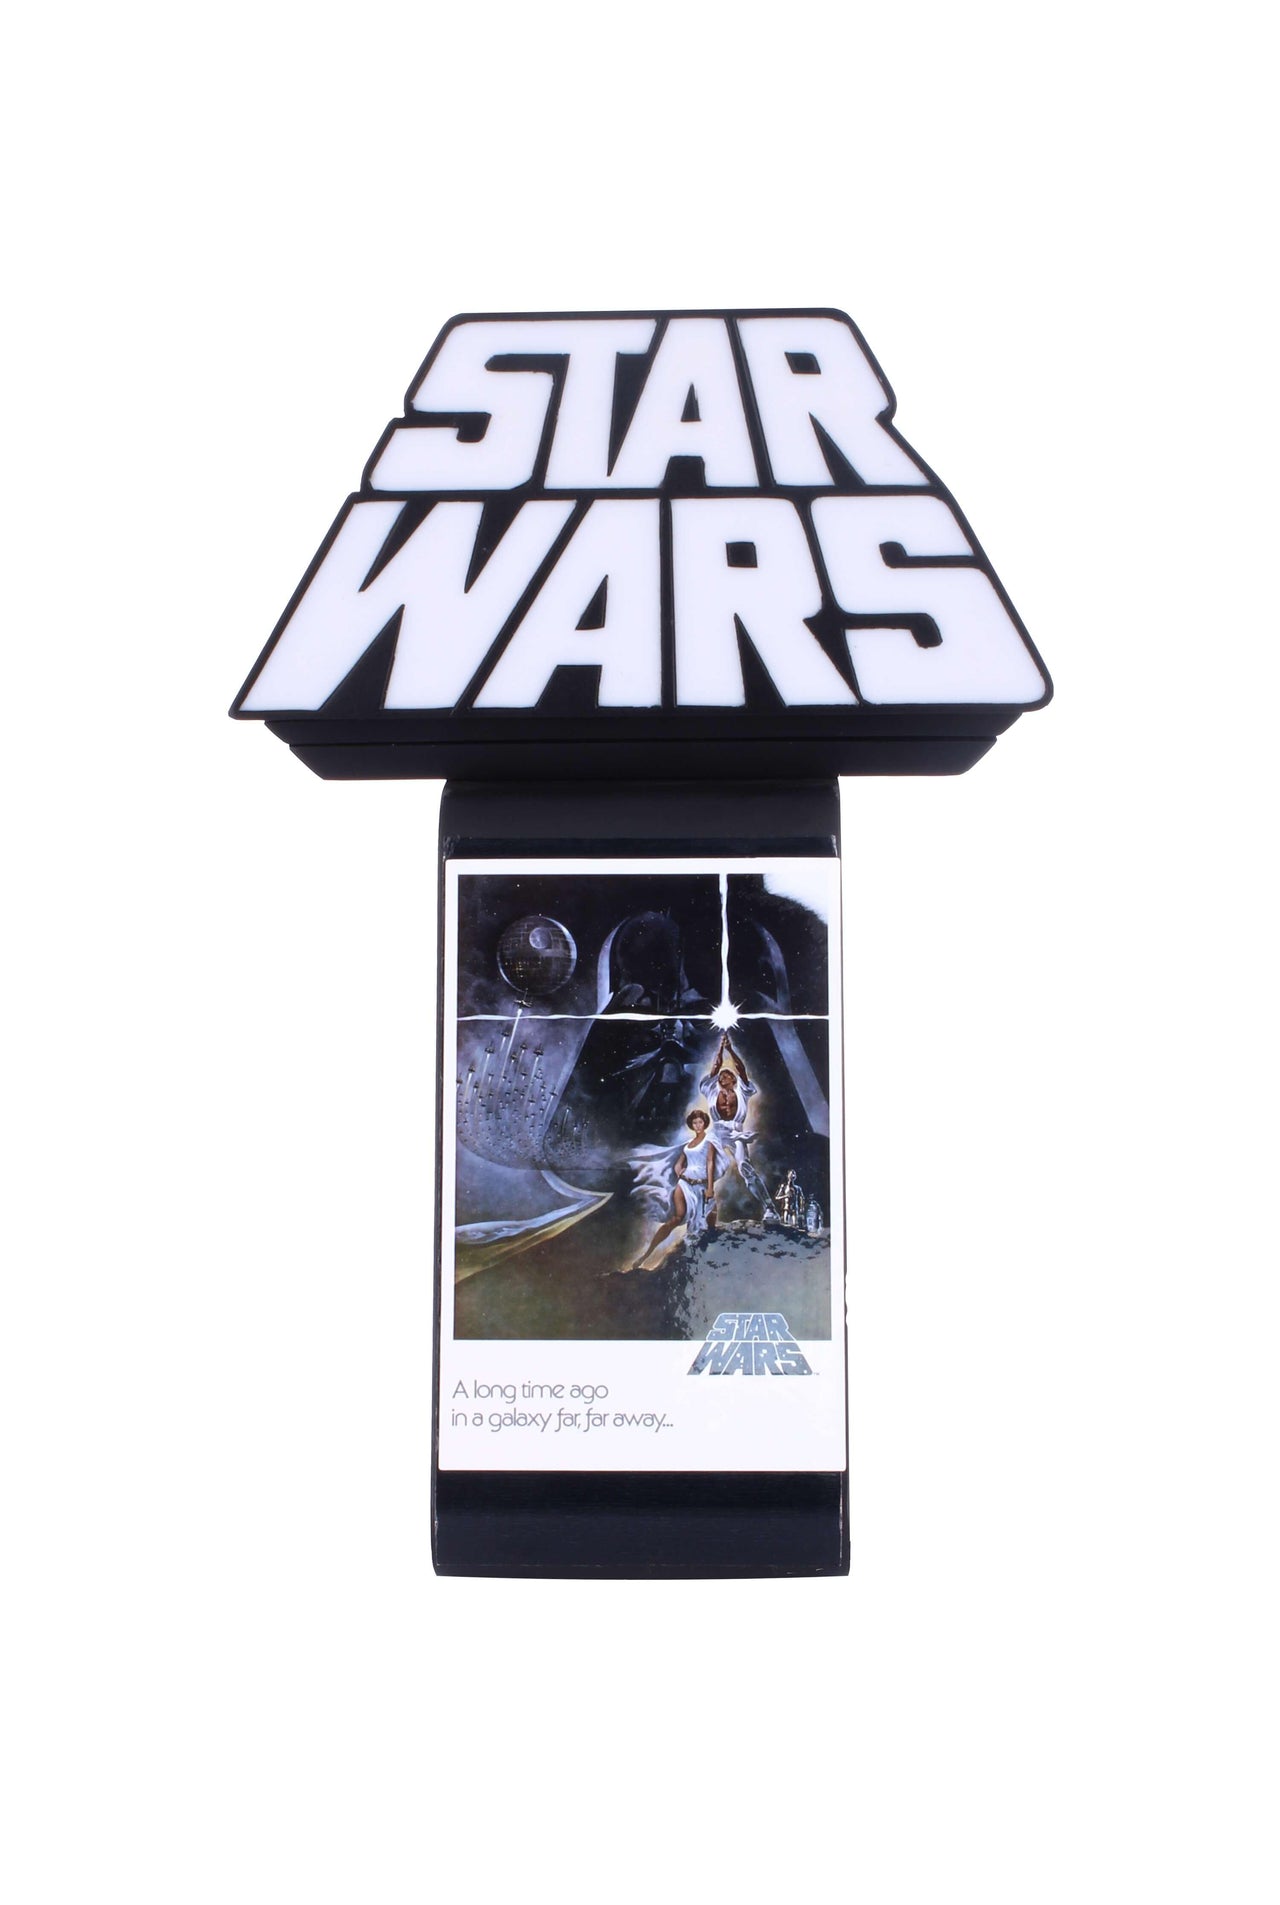 Star Wars 'Light Up' Cable Guys Ikon Phone & Controller Holder